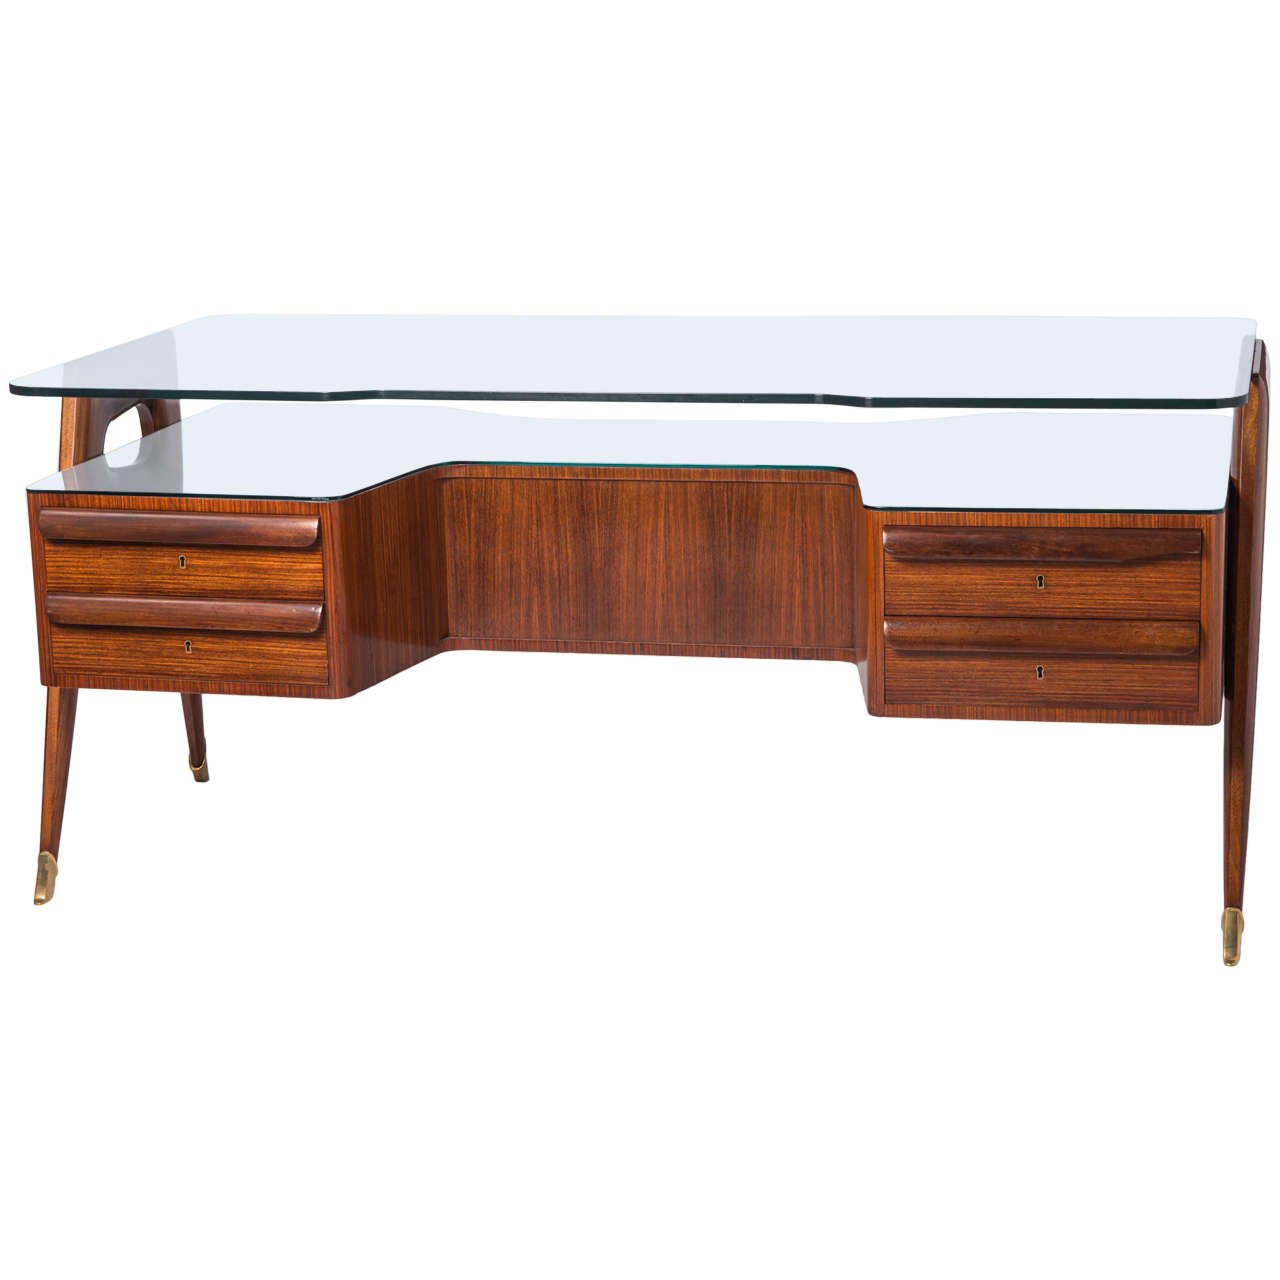 Paolo Buffa style Indian Rosewood and glass desk, Italy circa 1950